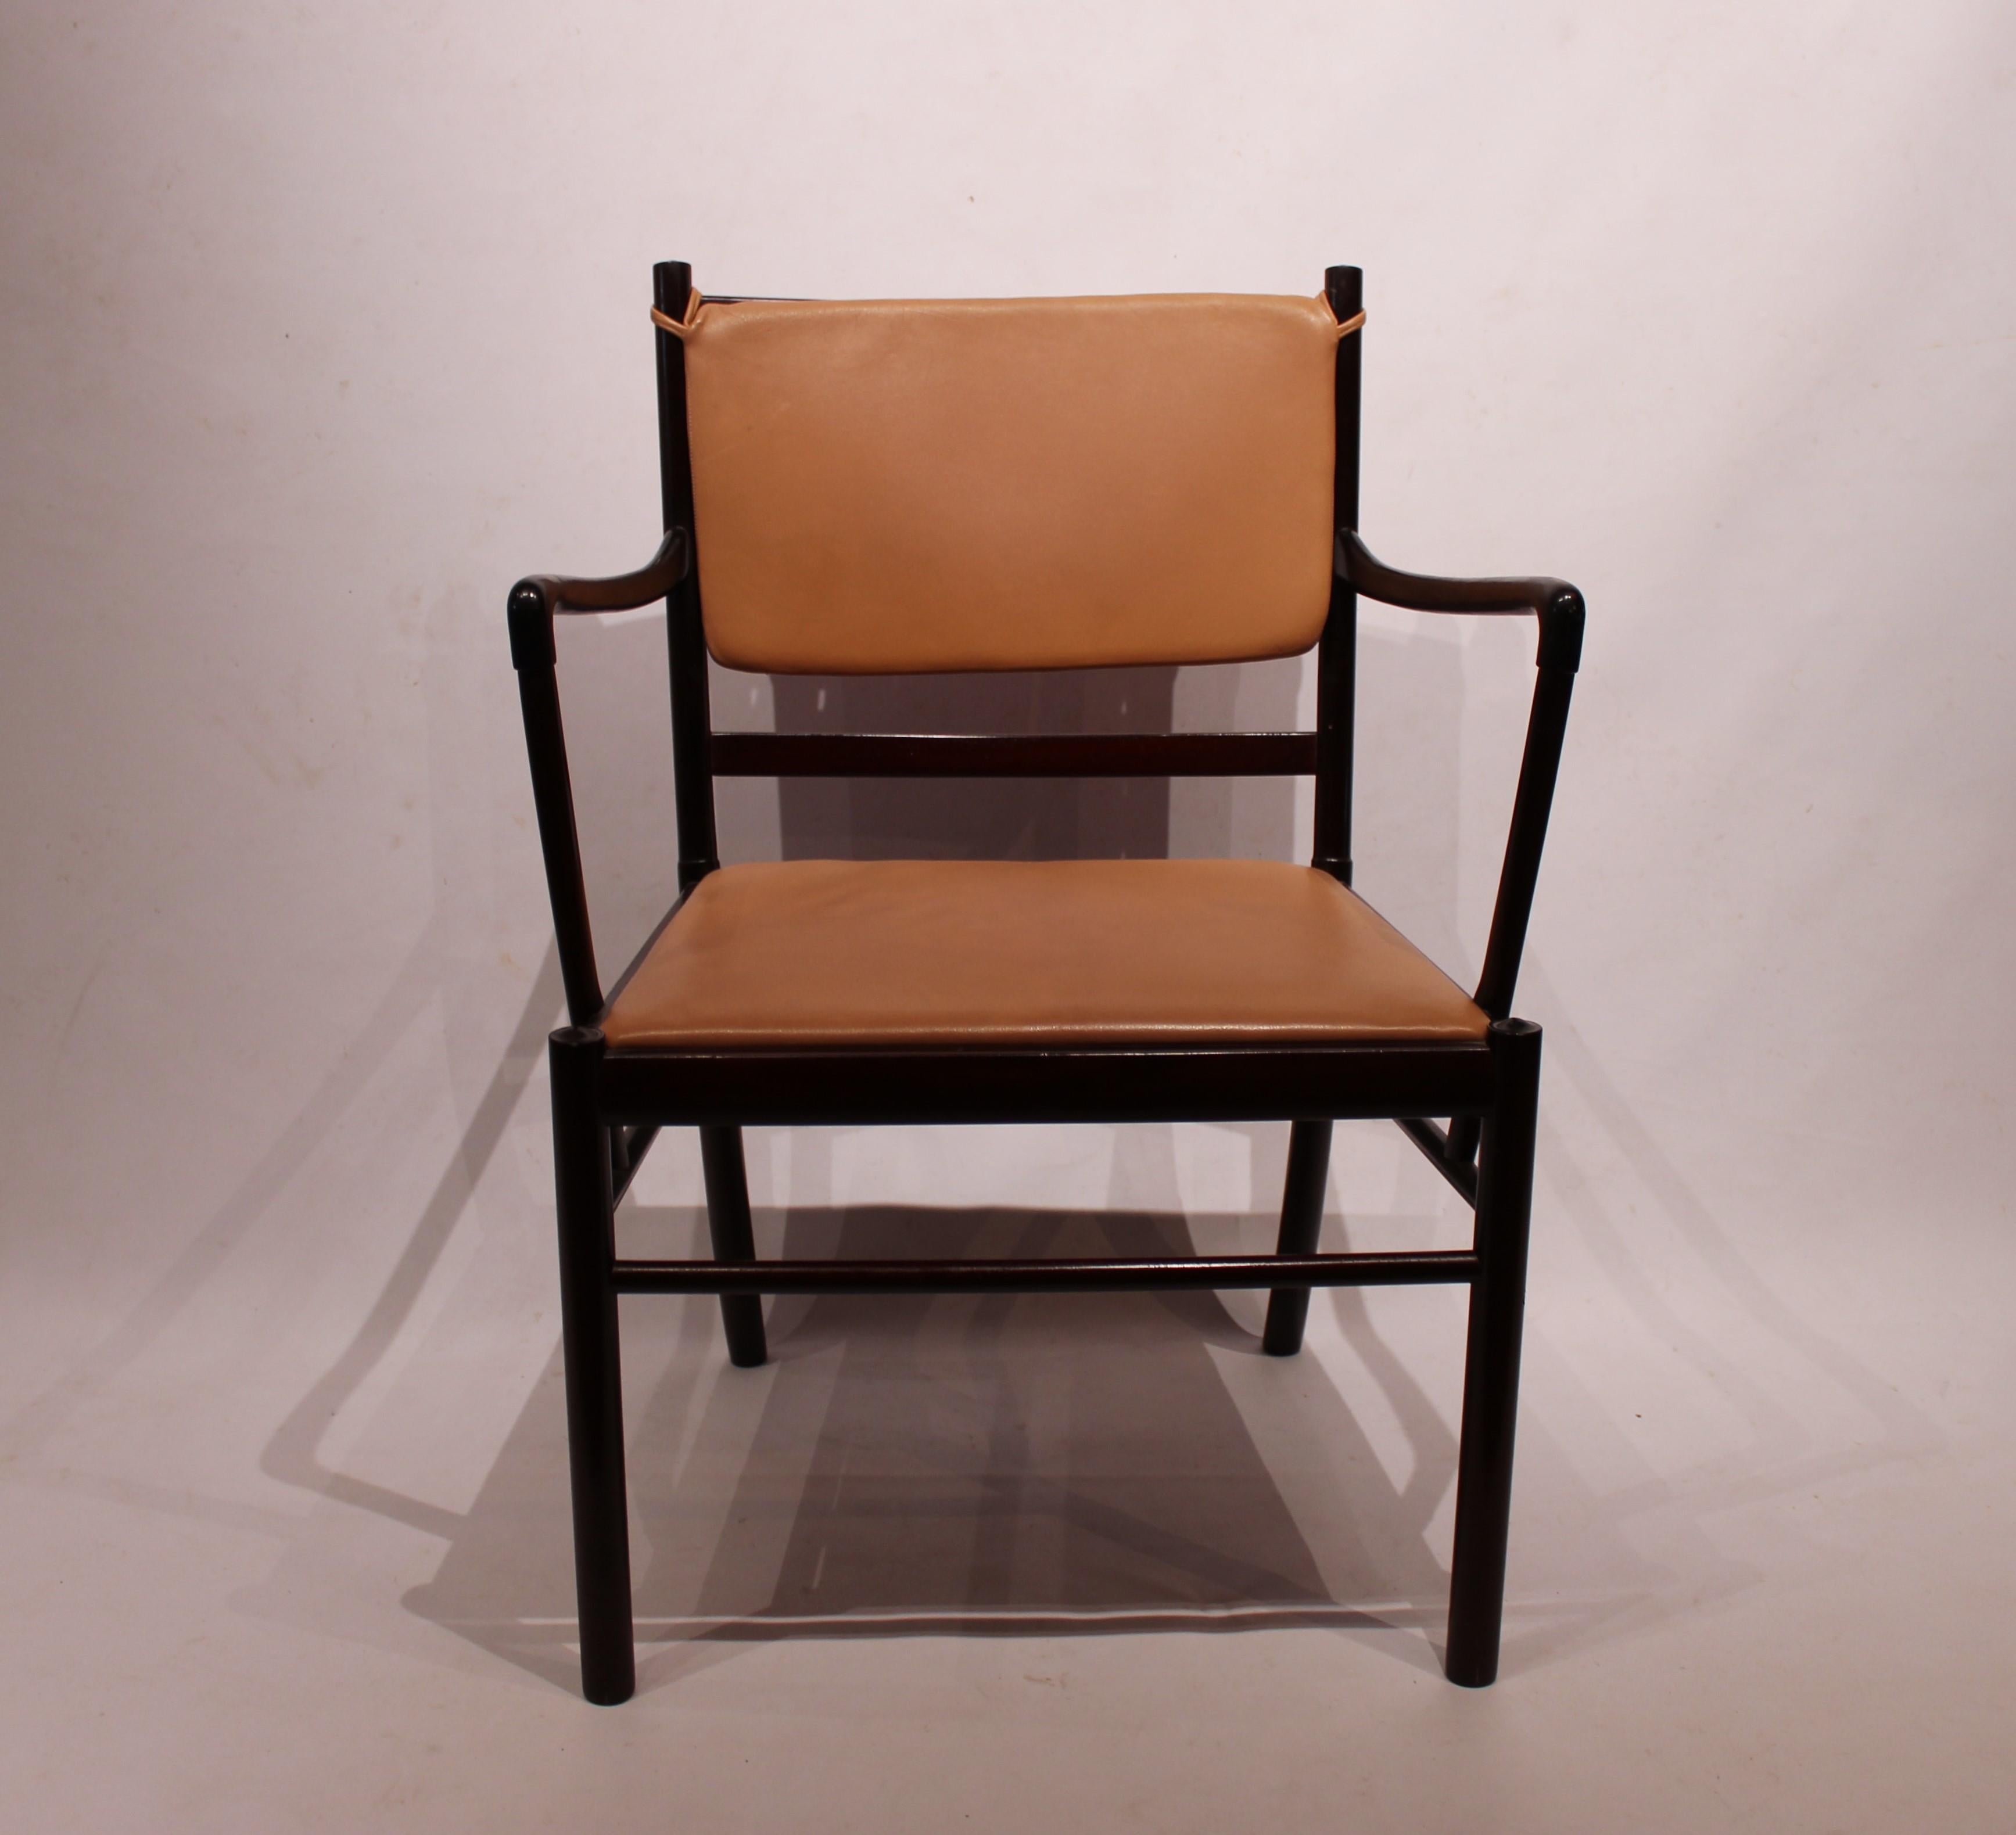 Armchair in mahogany and light brown leather designed by Ole Wanscher and manufactured by P. Jeppesen. The chair is in great vintage condition.